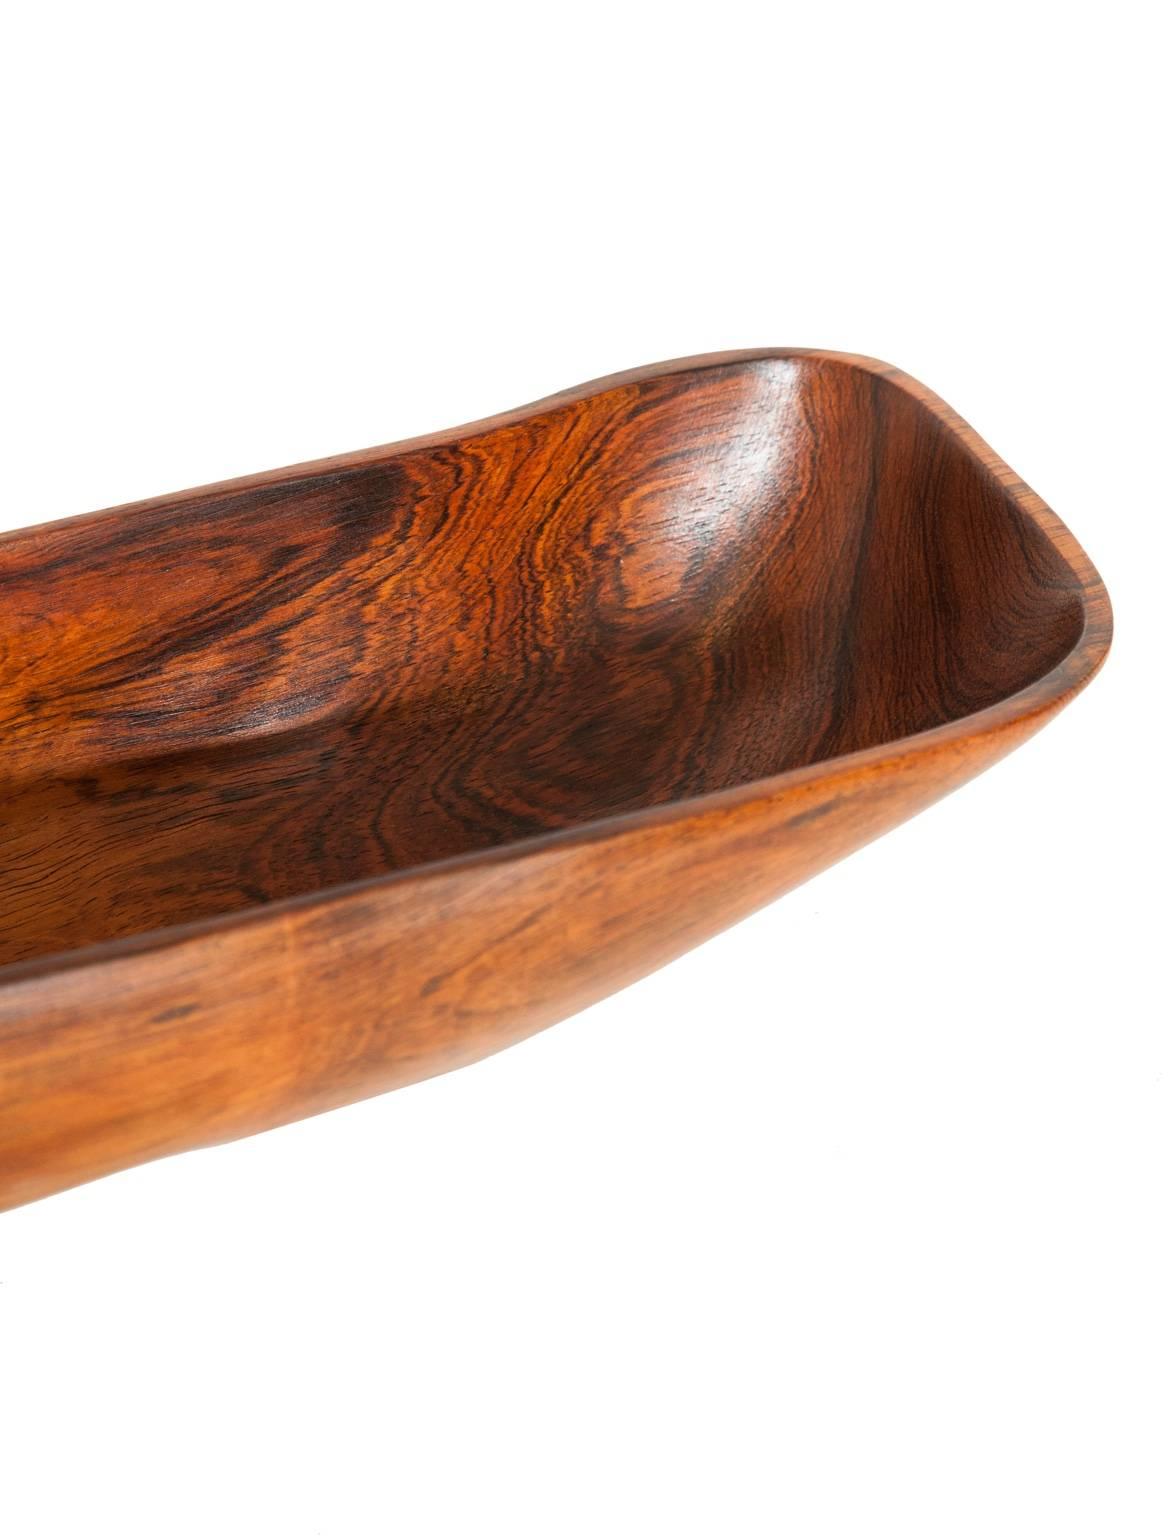 Mid-Century Modern Brazilian Rosewood Sculpted Bowl, circa 1960s For Sale